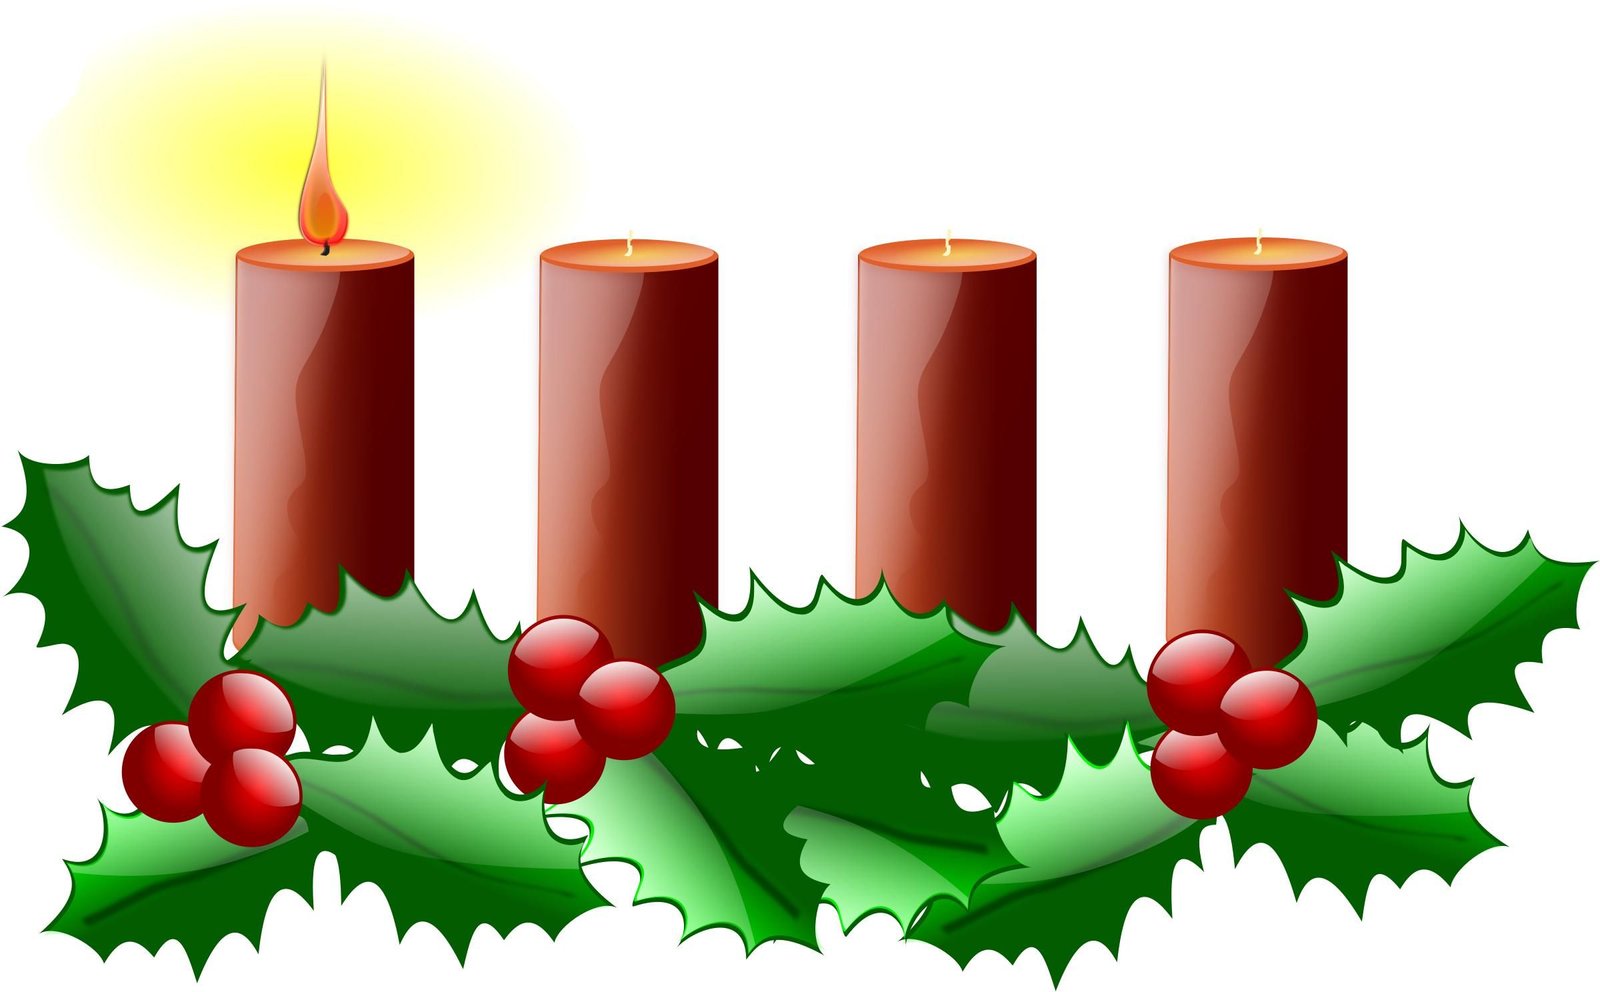 First Sunday of Advent